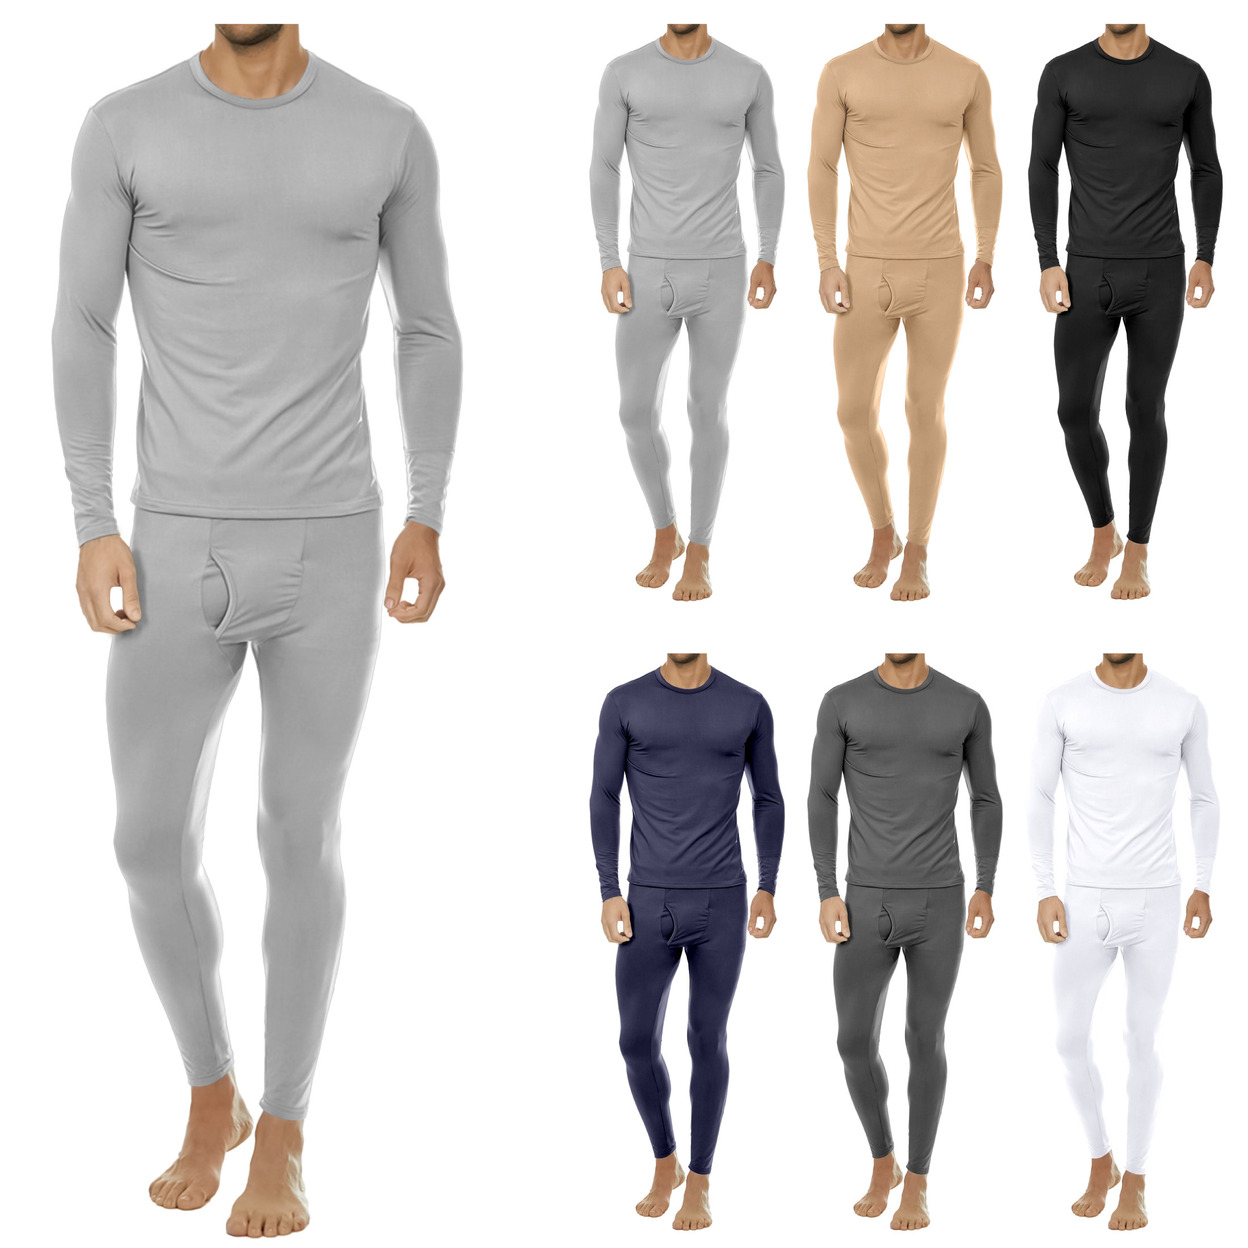 2-Sets: Men's Winter Warm Fleece Lined Thermal Underwear Set For Cold Weather - Black&grey, Small